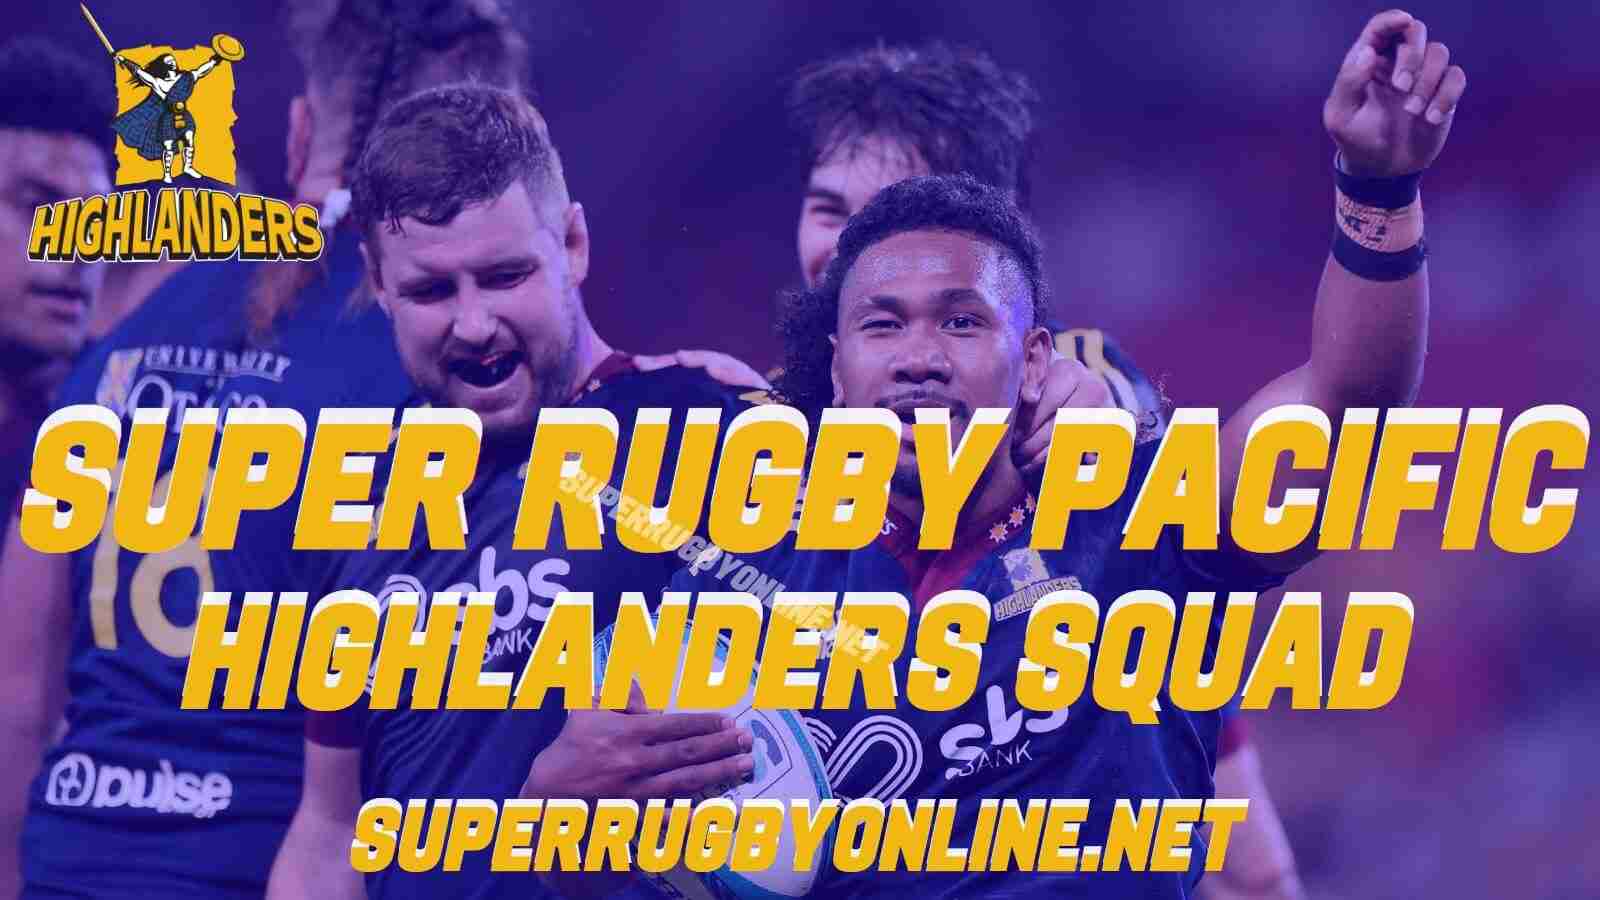 Super Rugby Pacific Highlanders Squad